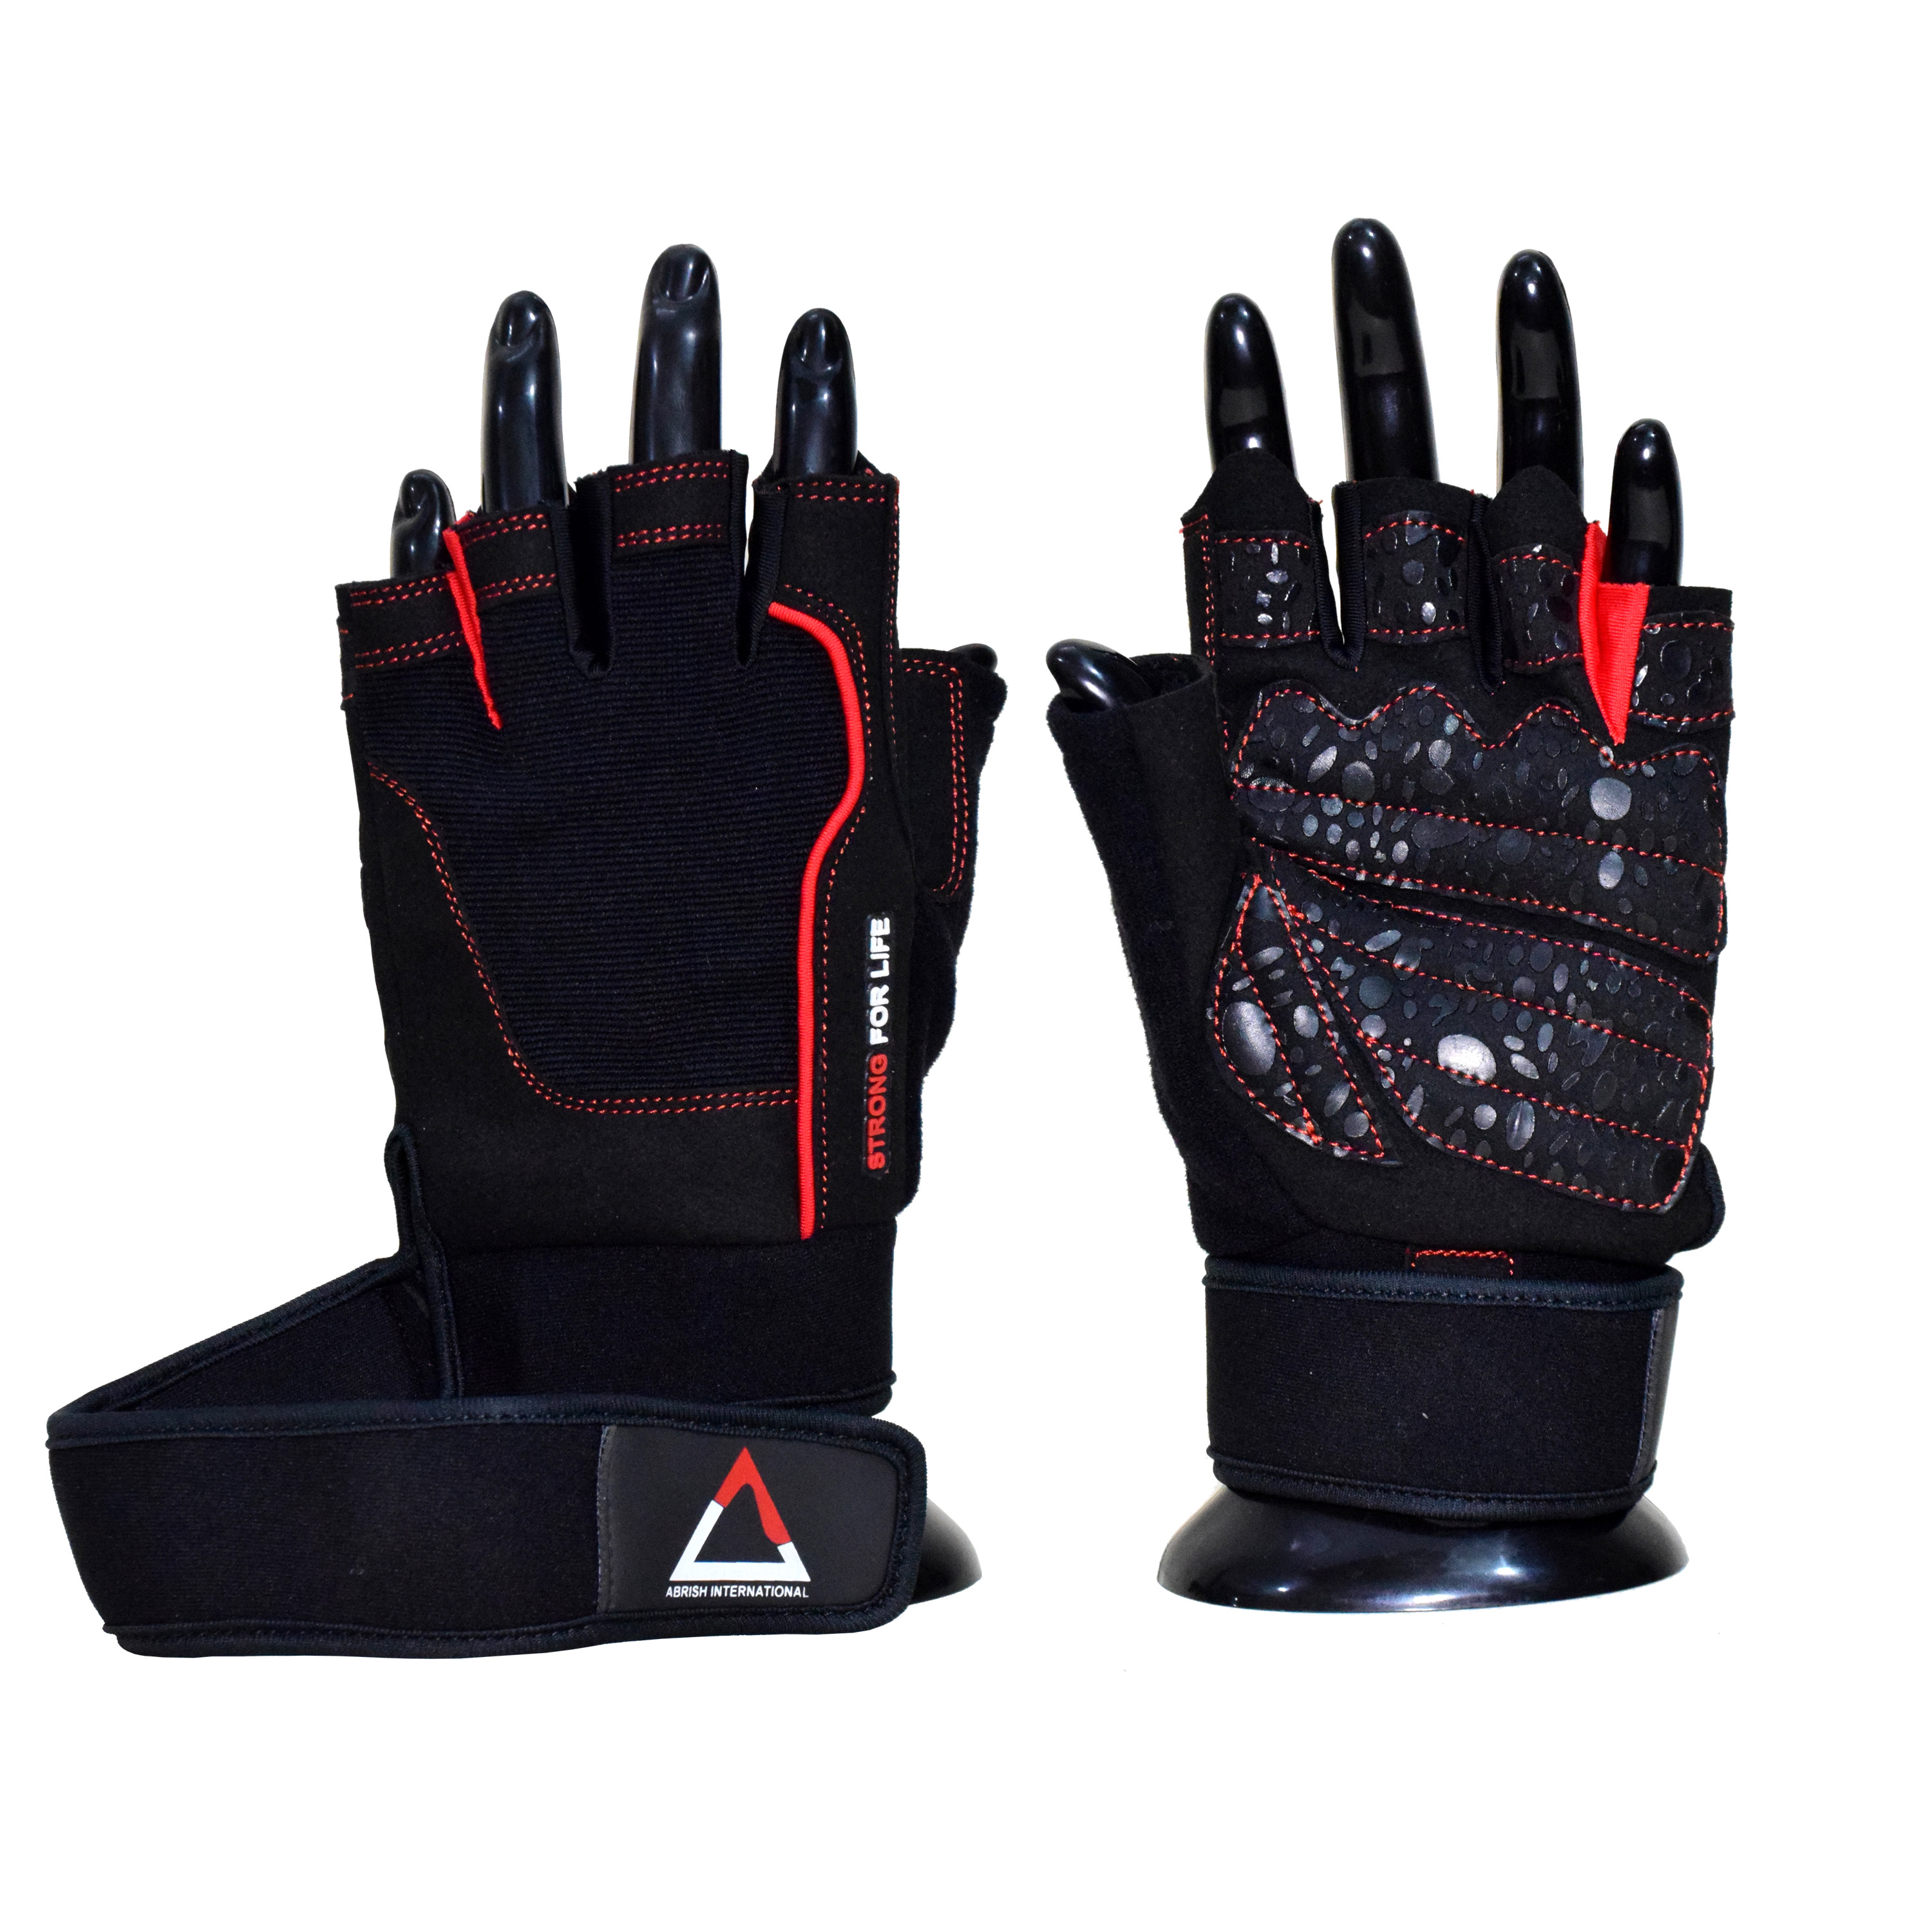 Strong for Life Gloves Black with Red Lining 